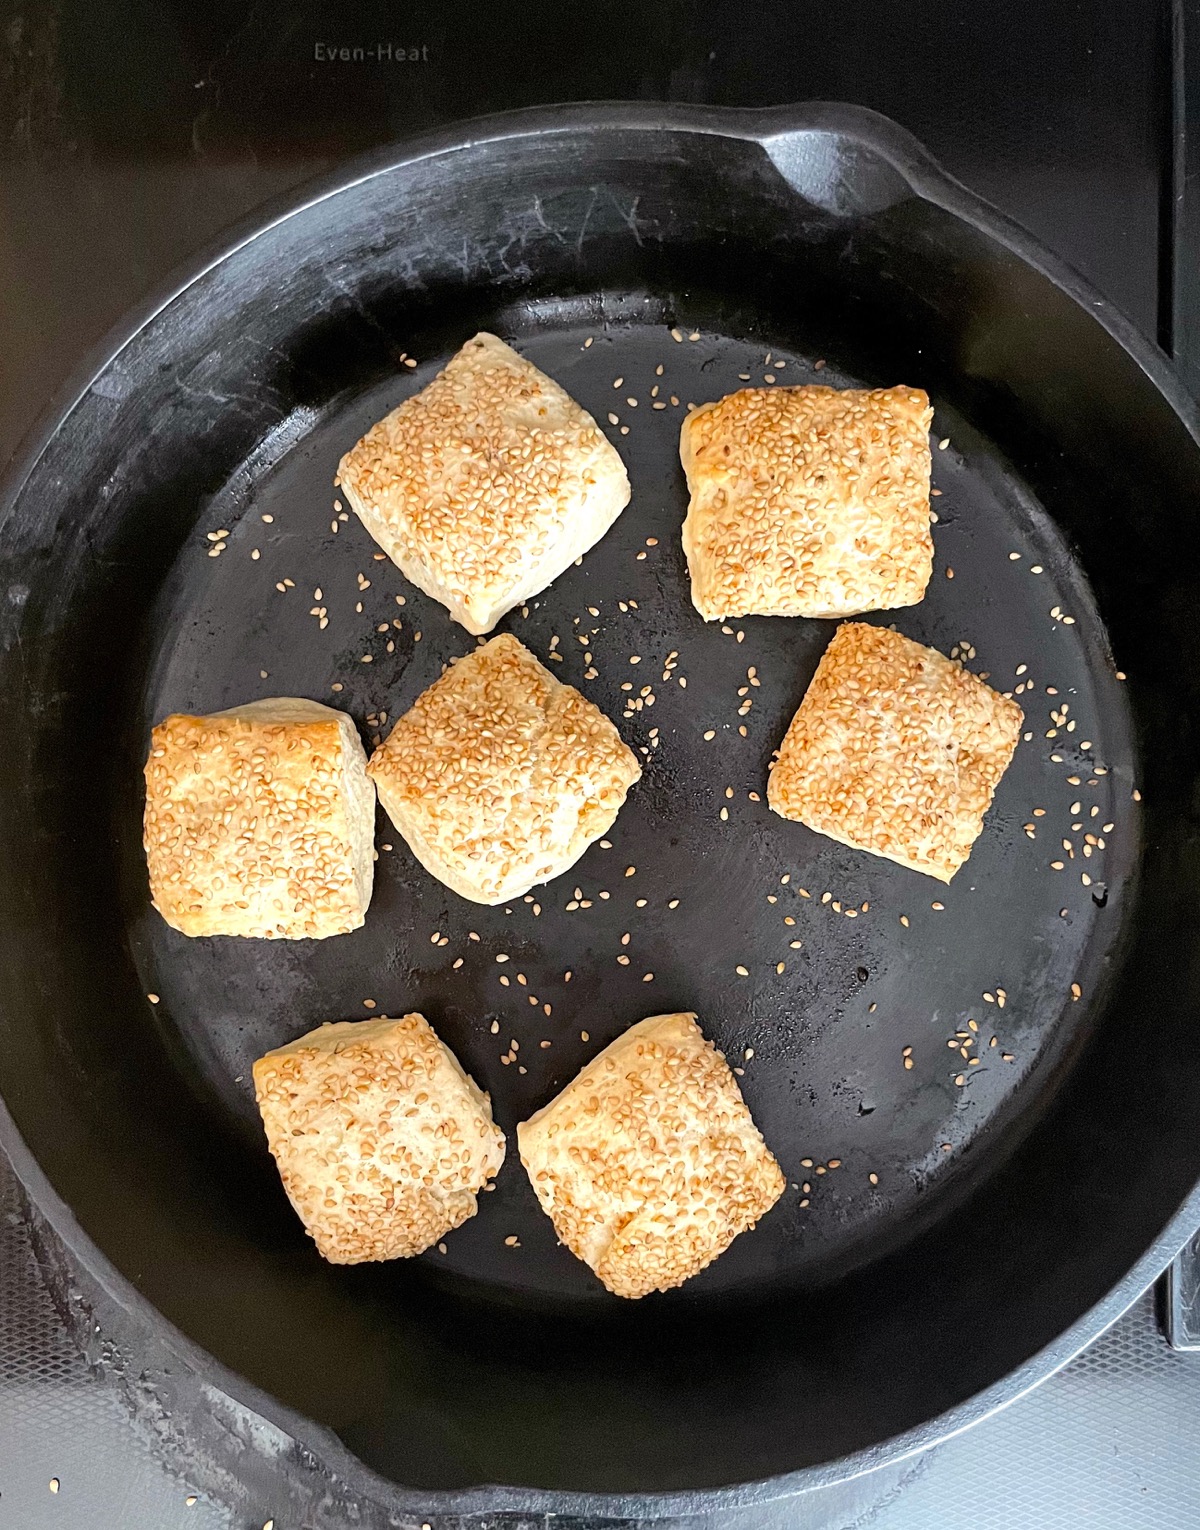 Square biscuits, topped with sesame seeds, baked in a round cast iron frying pan